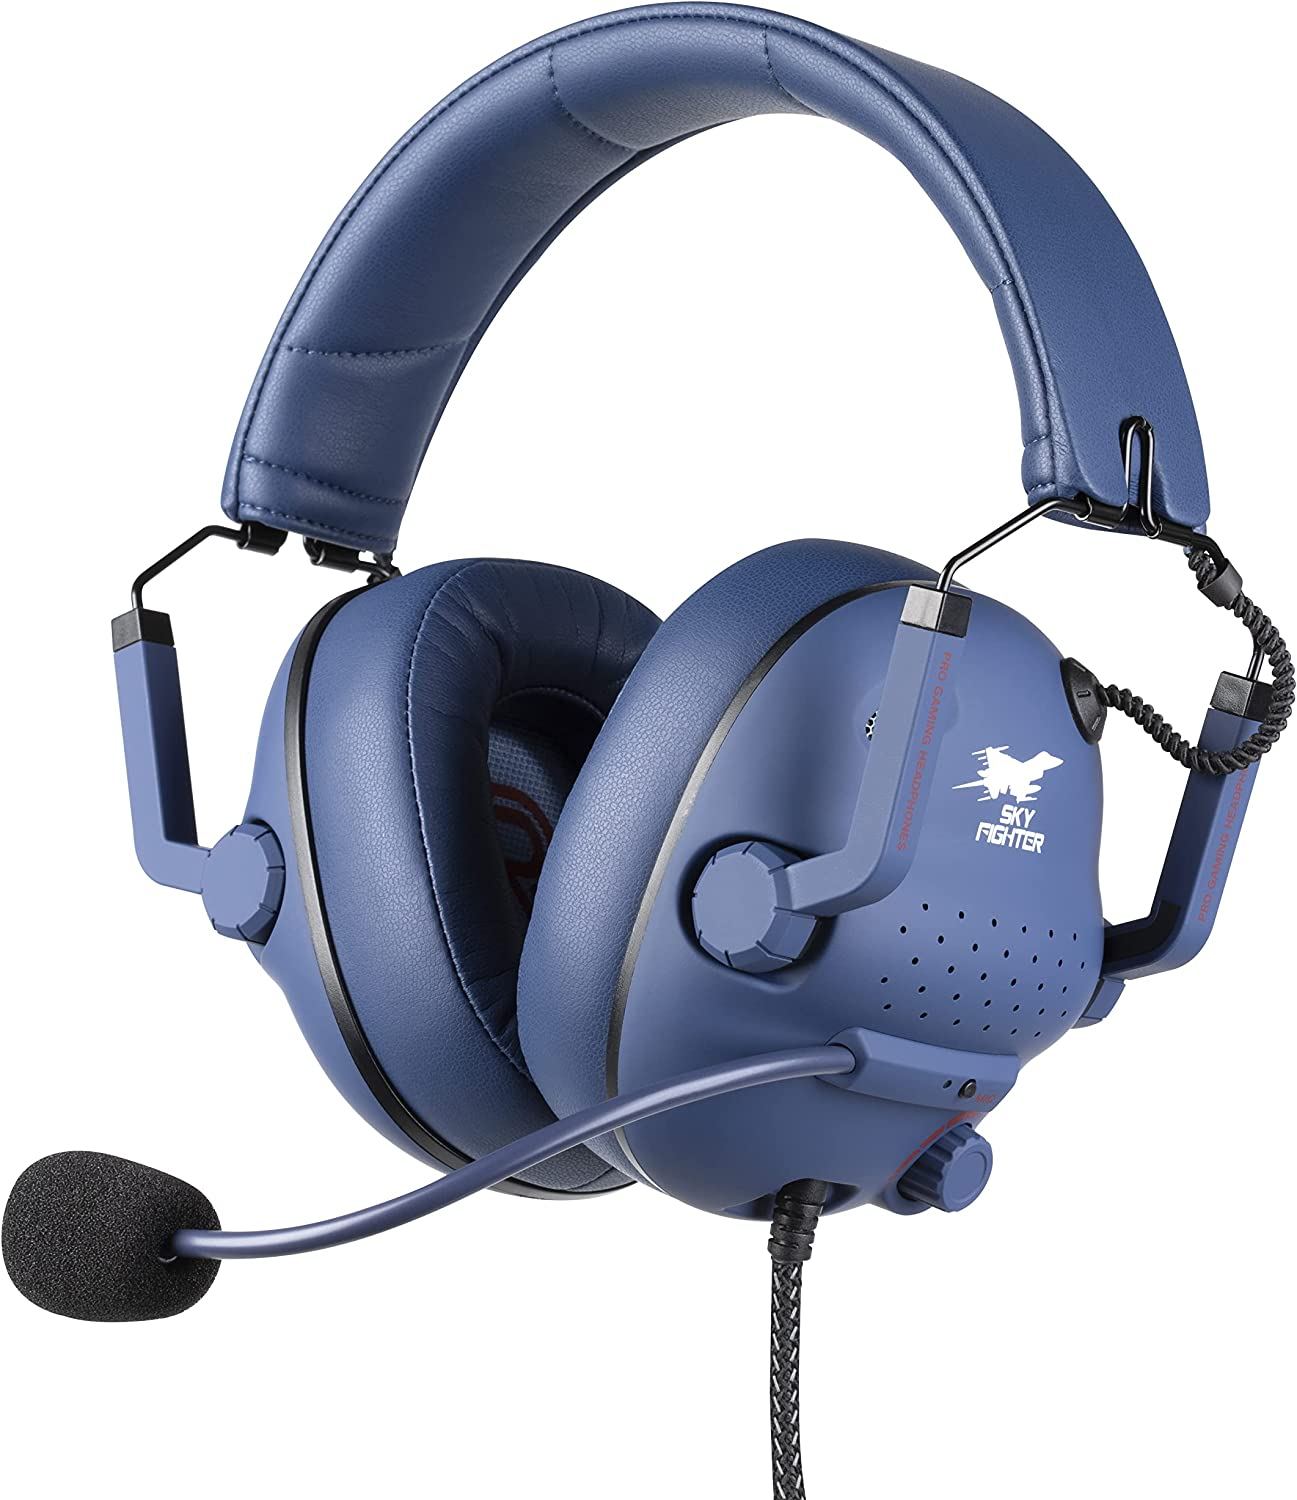 Konix Skyfighter Gaming Headset (Blue) Windows for for PC